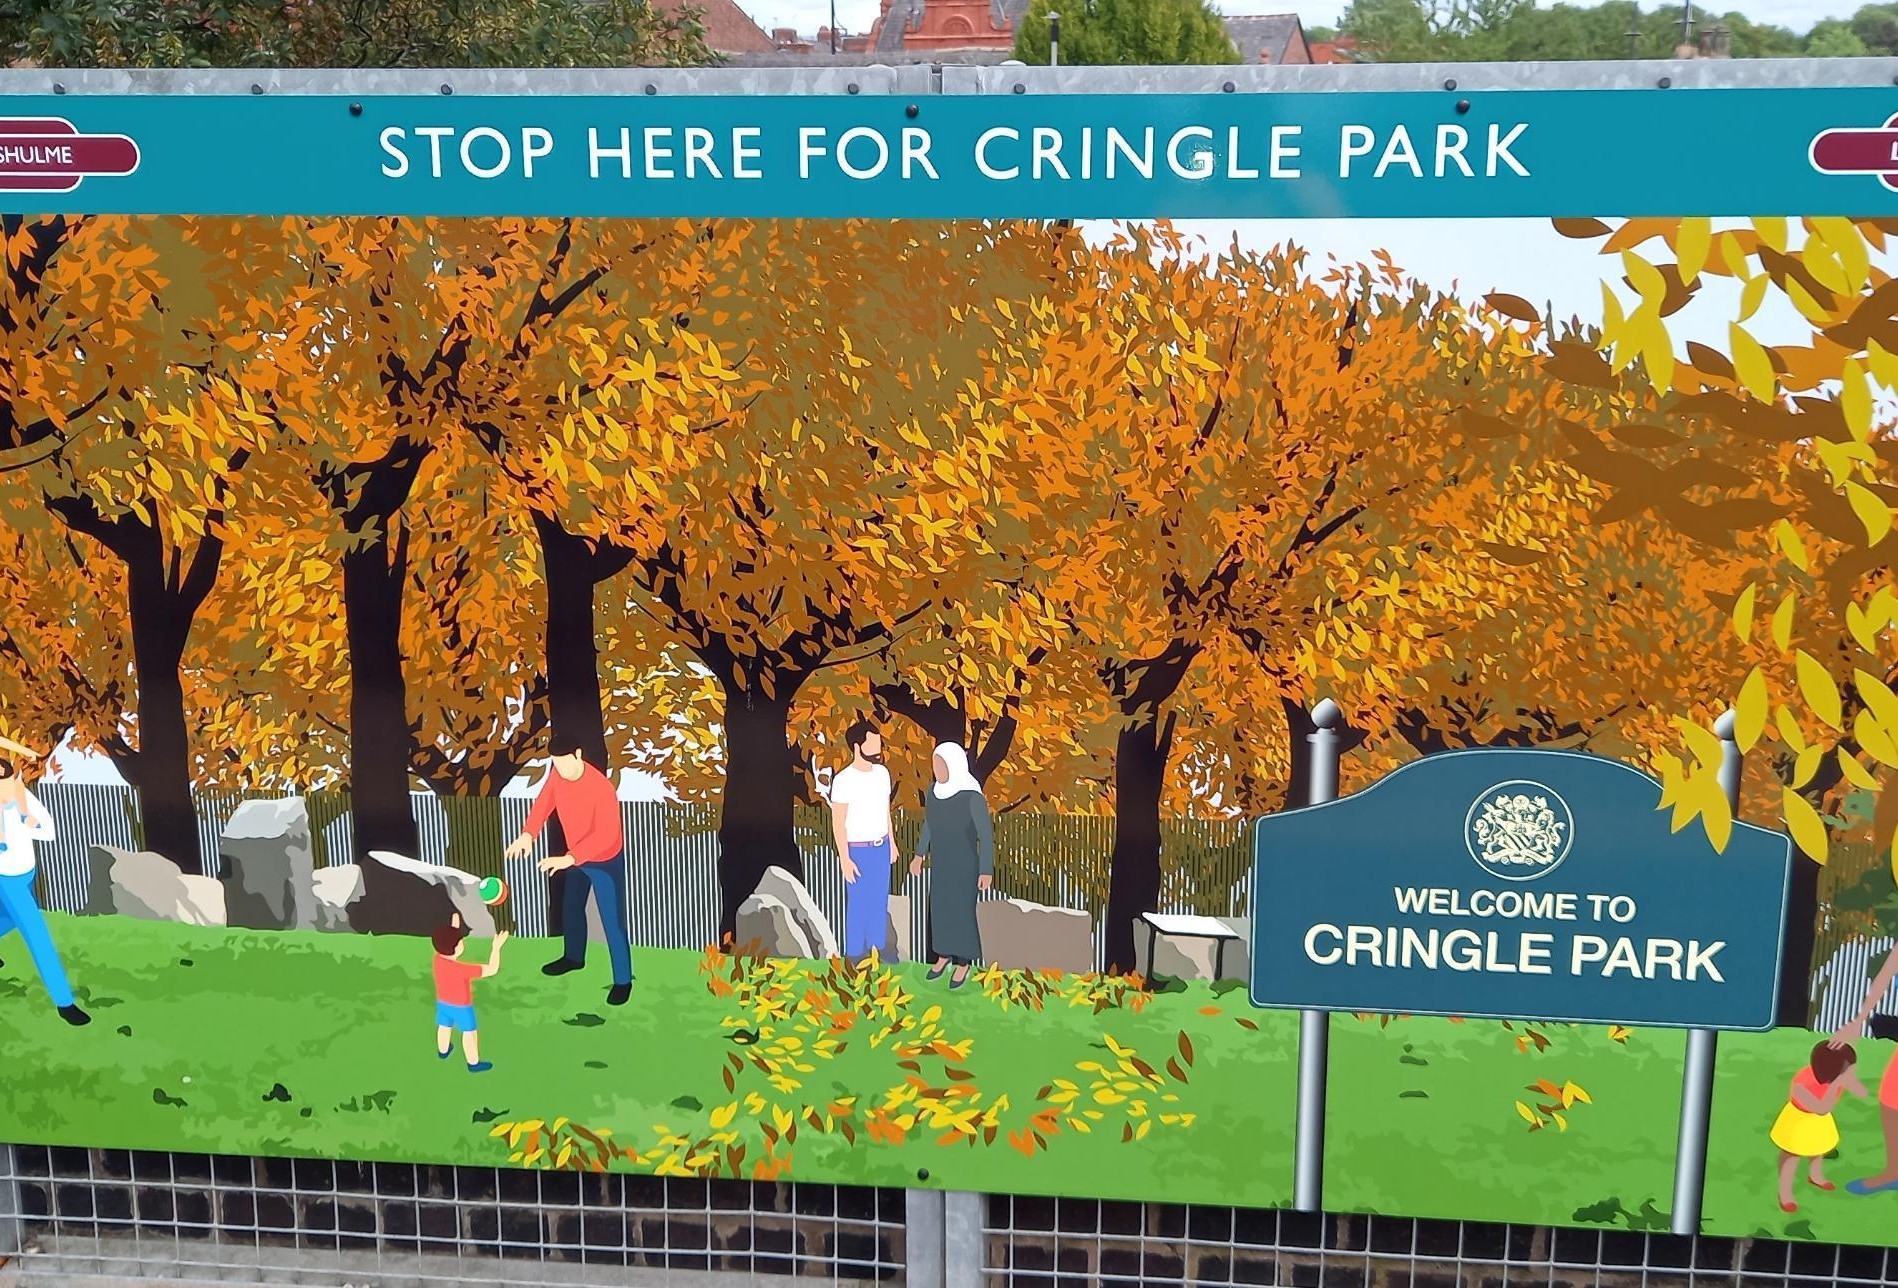 this-image-shows-art-at-levenshulme-depicting-cringle-park